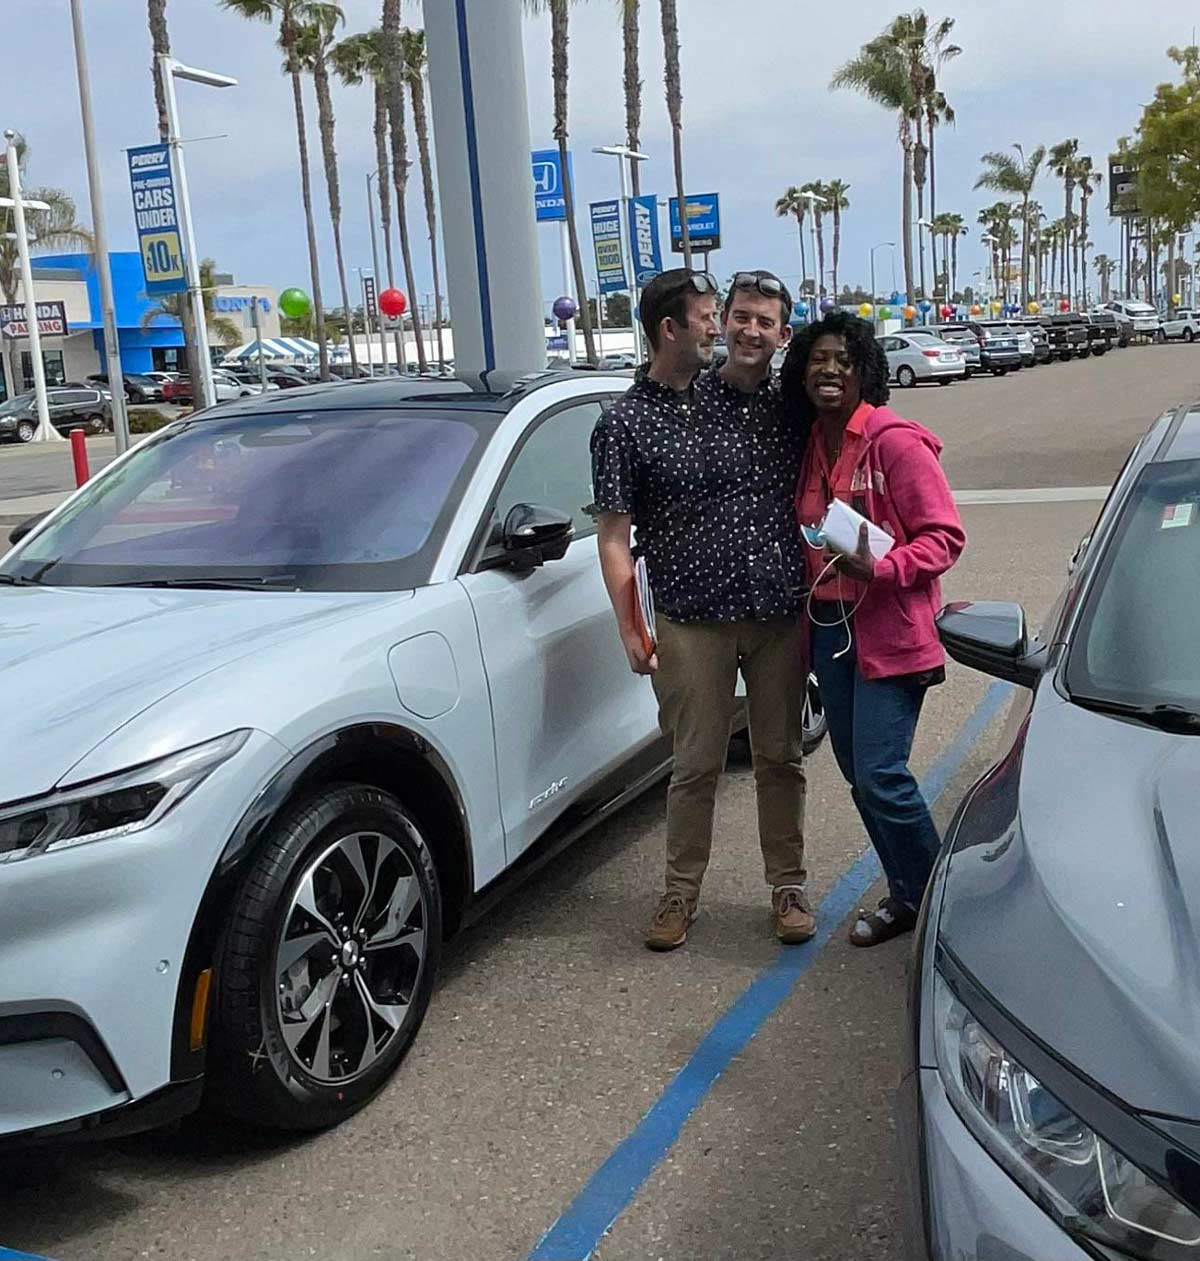 Wife and I bought a car, accidentally took a pic with panorama. Guess I’m an alien